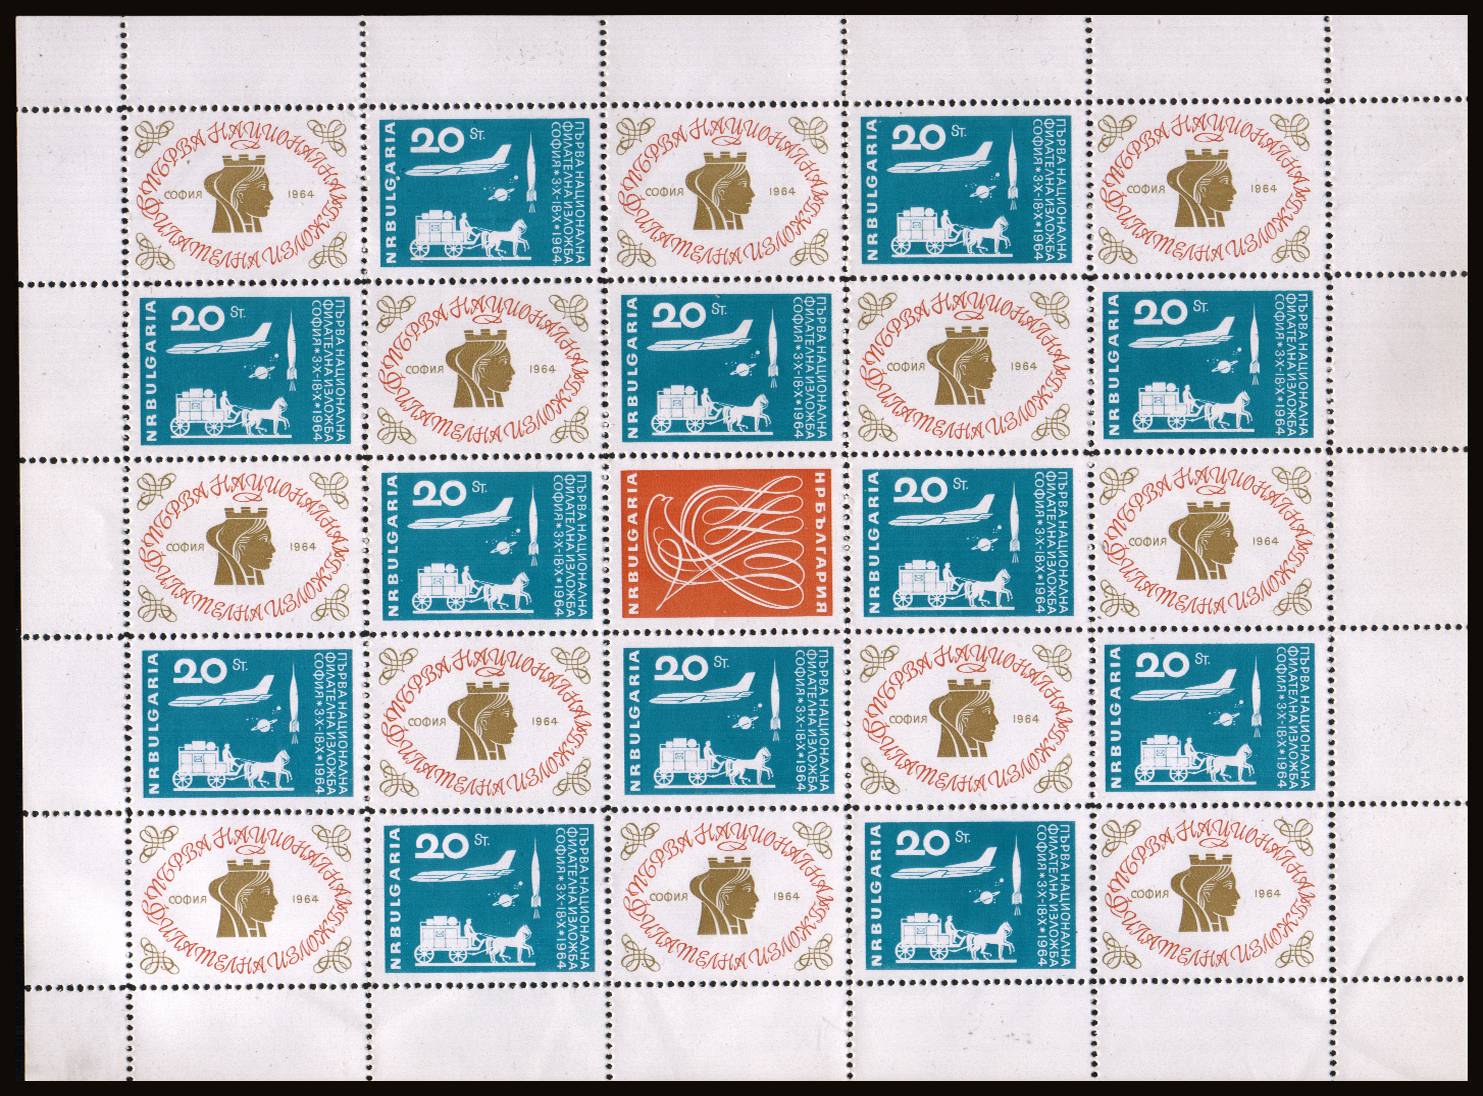 First National Stamp Exhibition - Sofia<br/>
The special sheetlet of twelve stamps and thirteen labels superb unmounted mint. Scarce